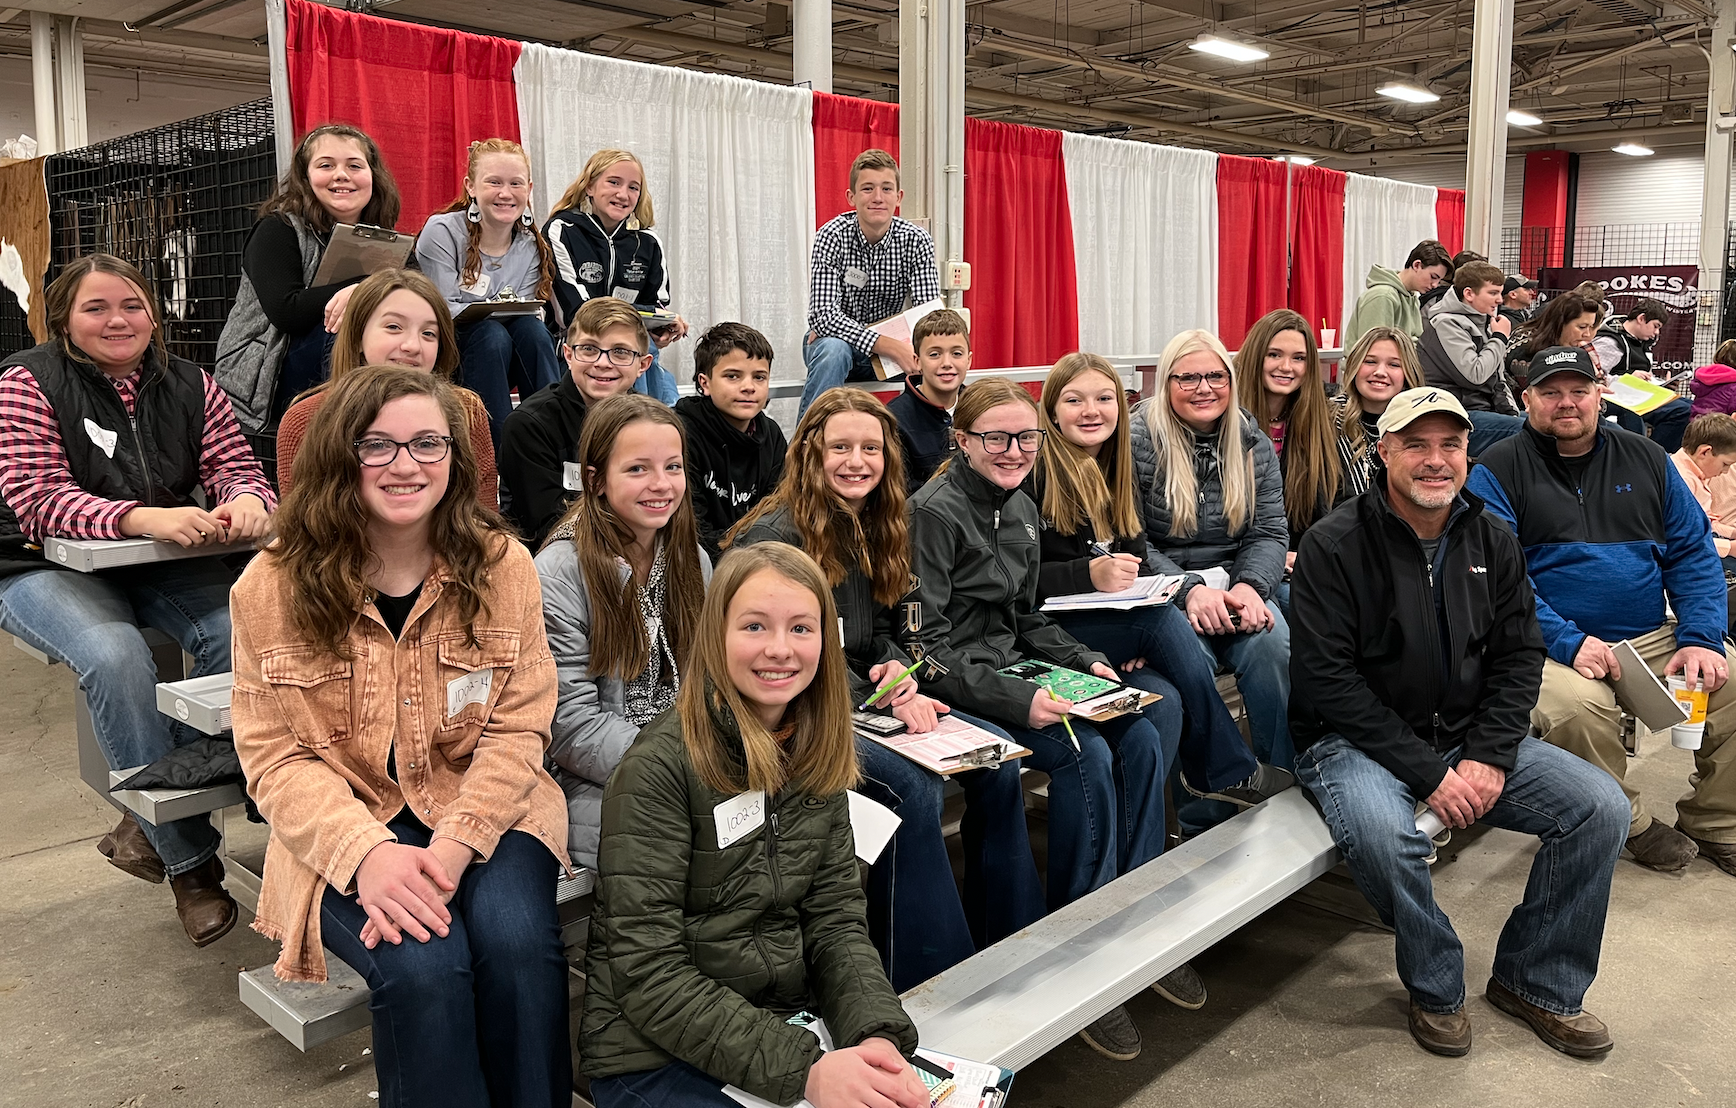 Tipton Livestock Judging Team is pictured at the contest. Members are seated on bleachers in front of a red and white cloth